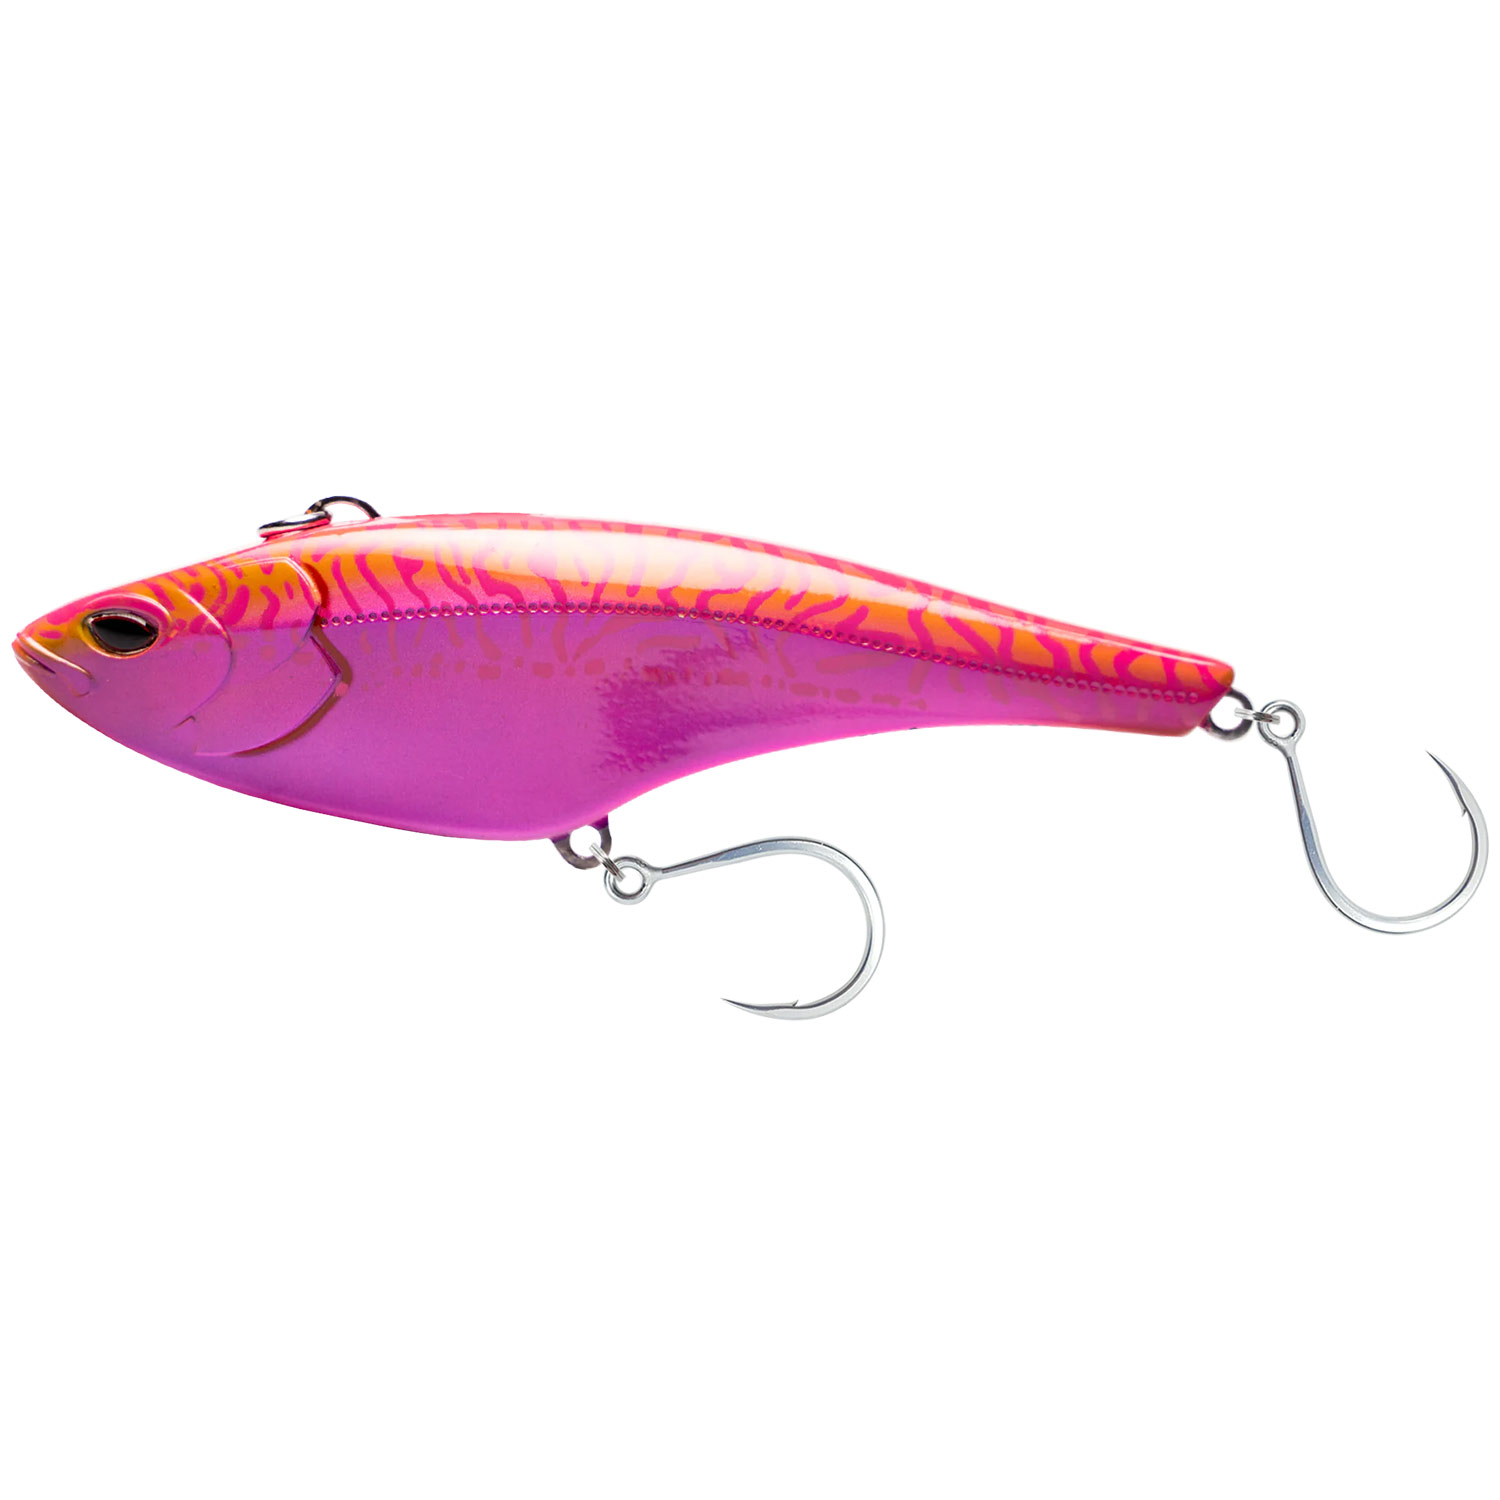 Nomad Madmacs 200 Sinking High Speed 8 Pink Lava